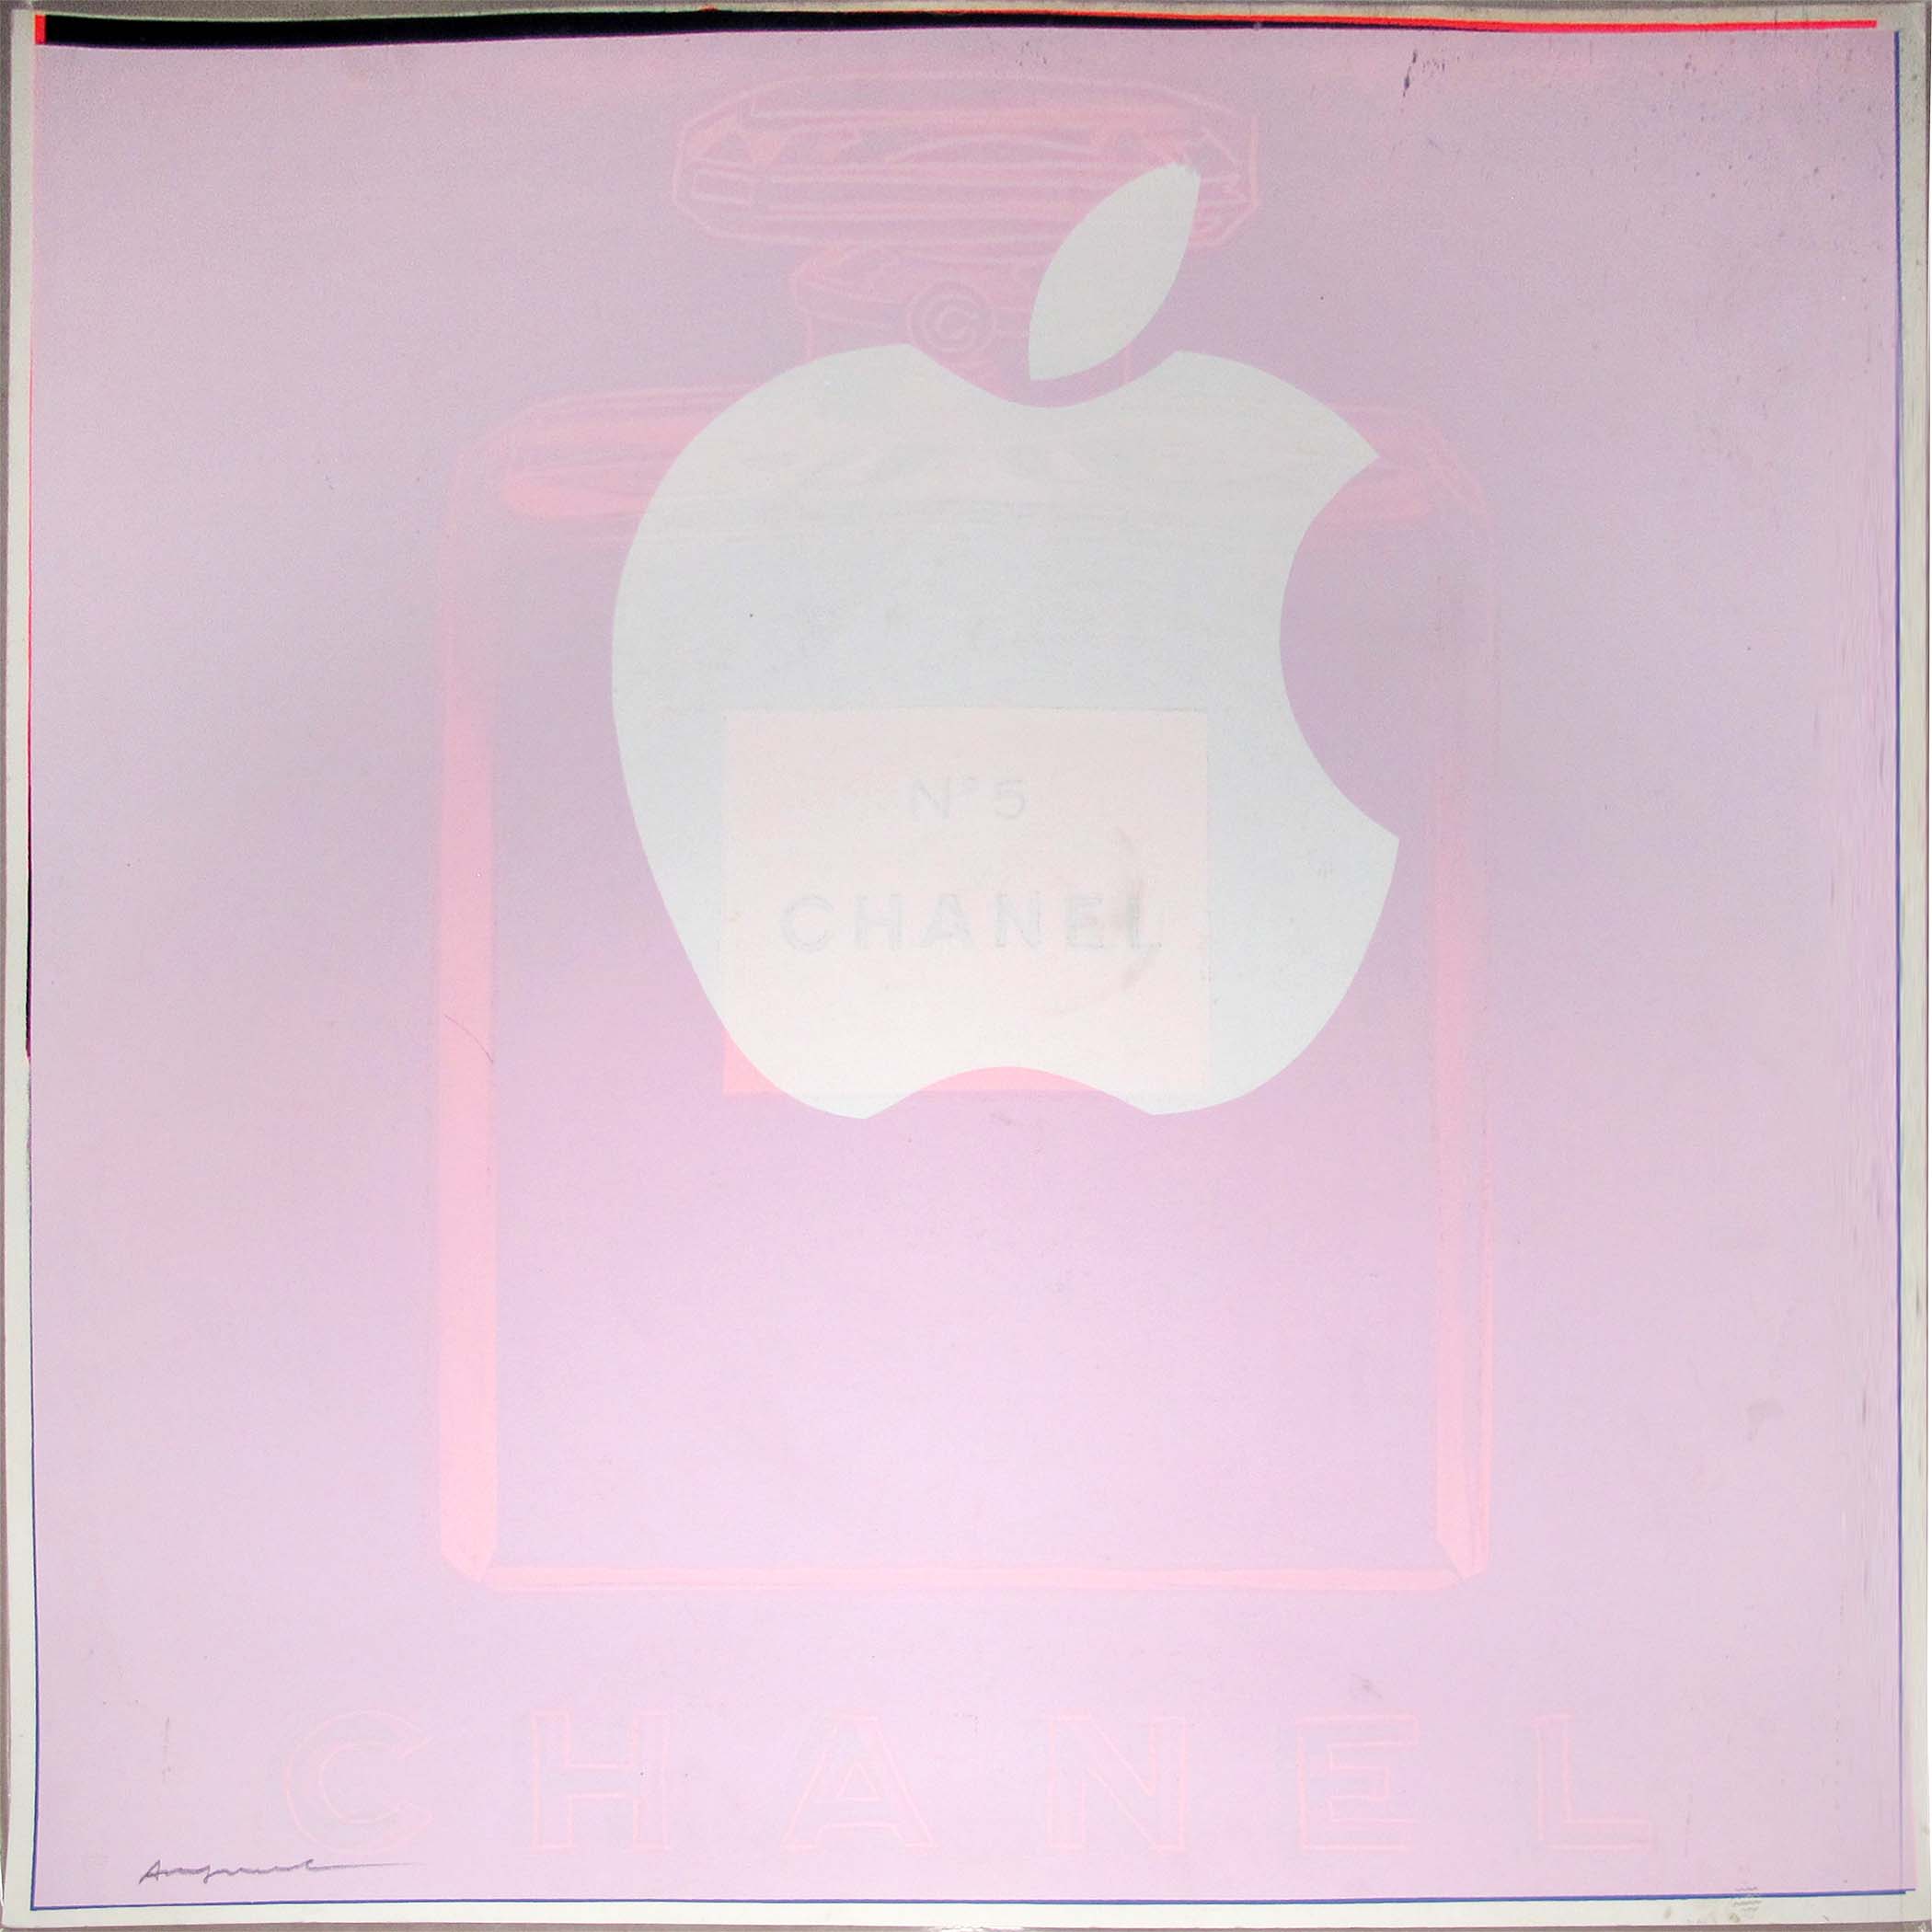 Andy Warhol | Ads | Chanel | Apple | 1985 | Image of Artists' work.